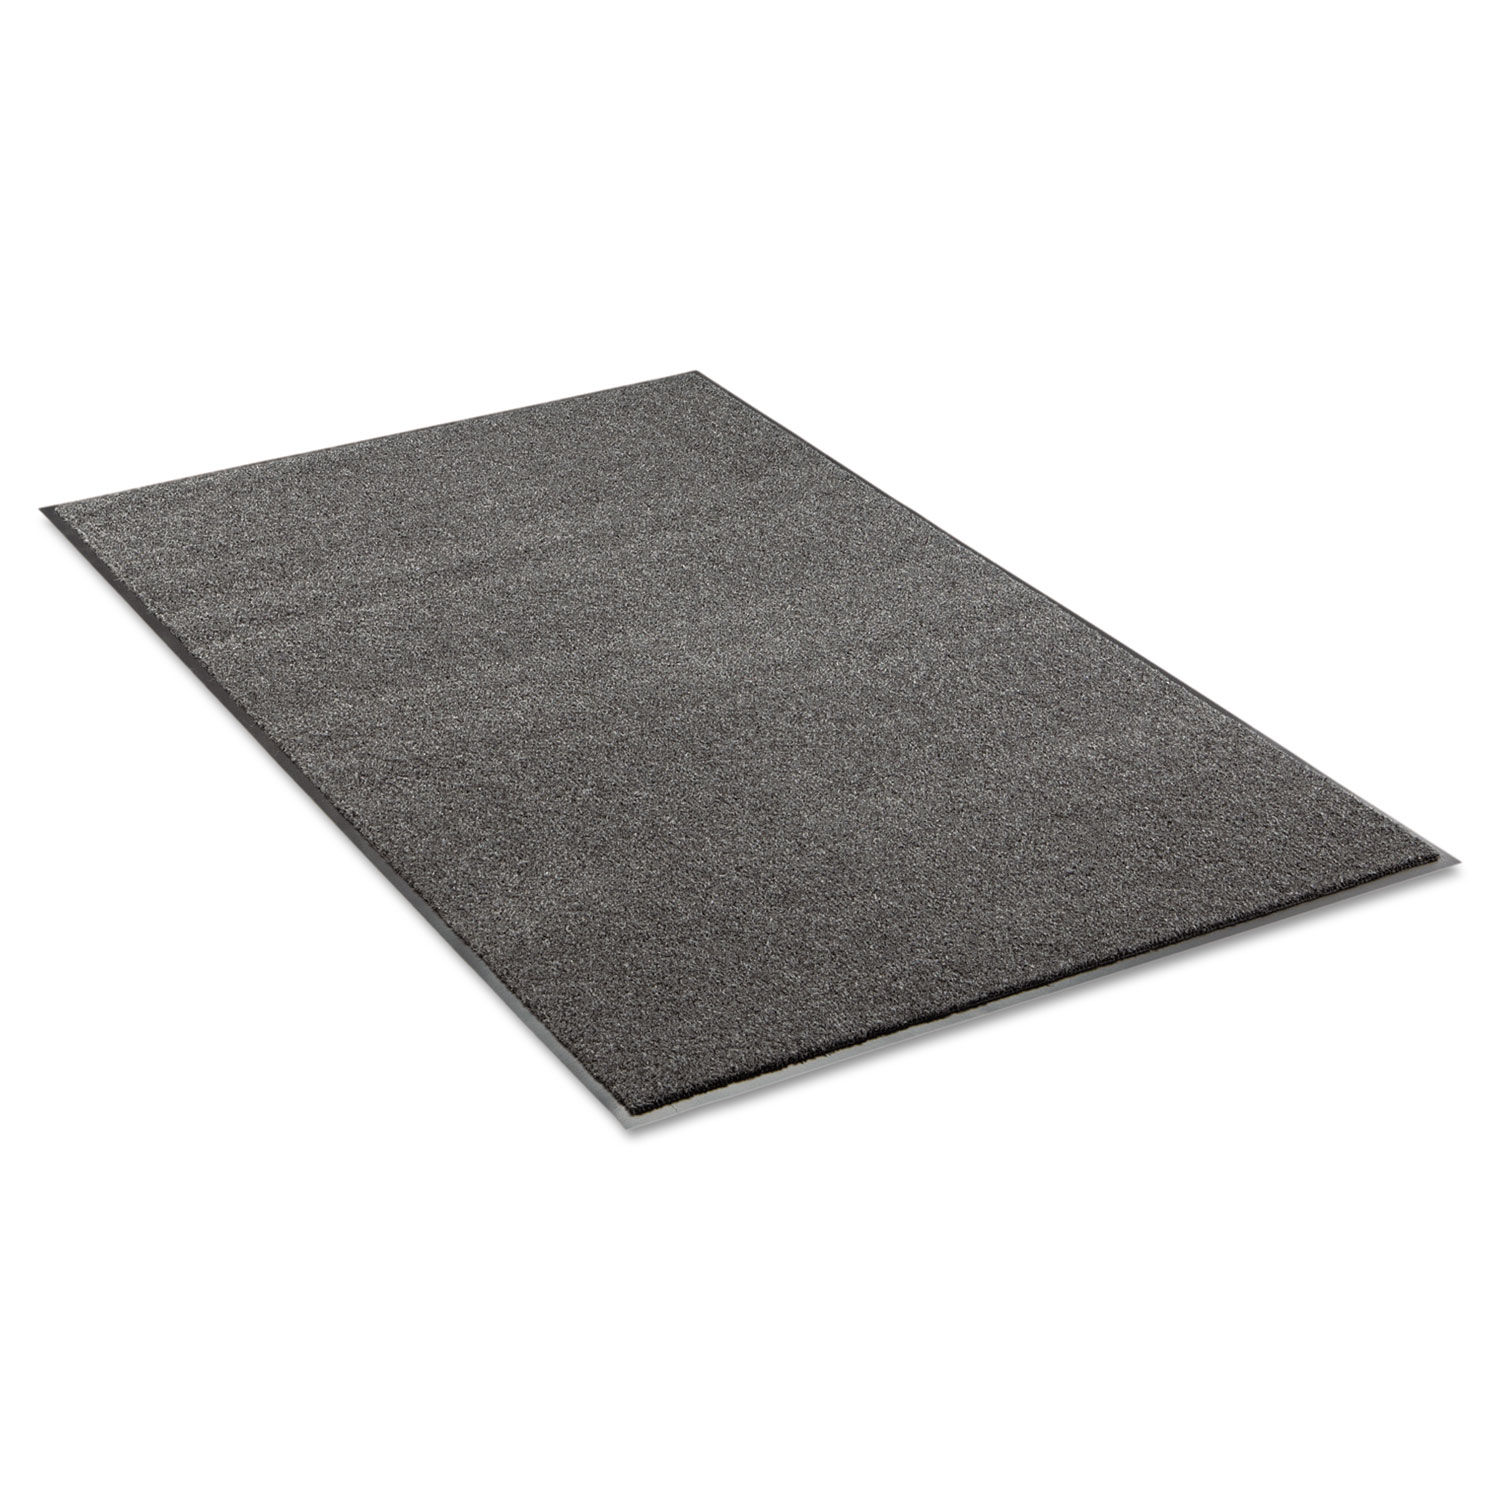 Rely-On Olefin Indoor Wiper Mat 36 x 60, Charcoal